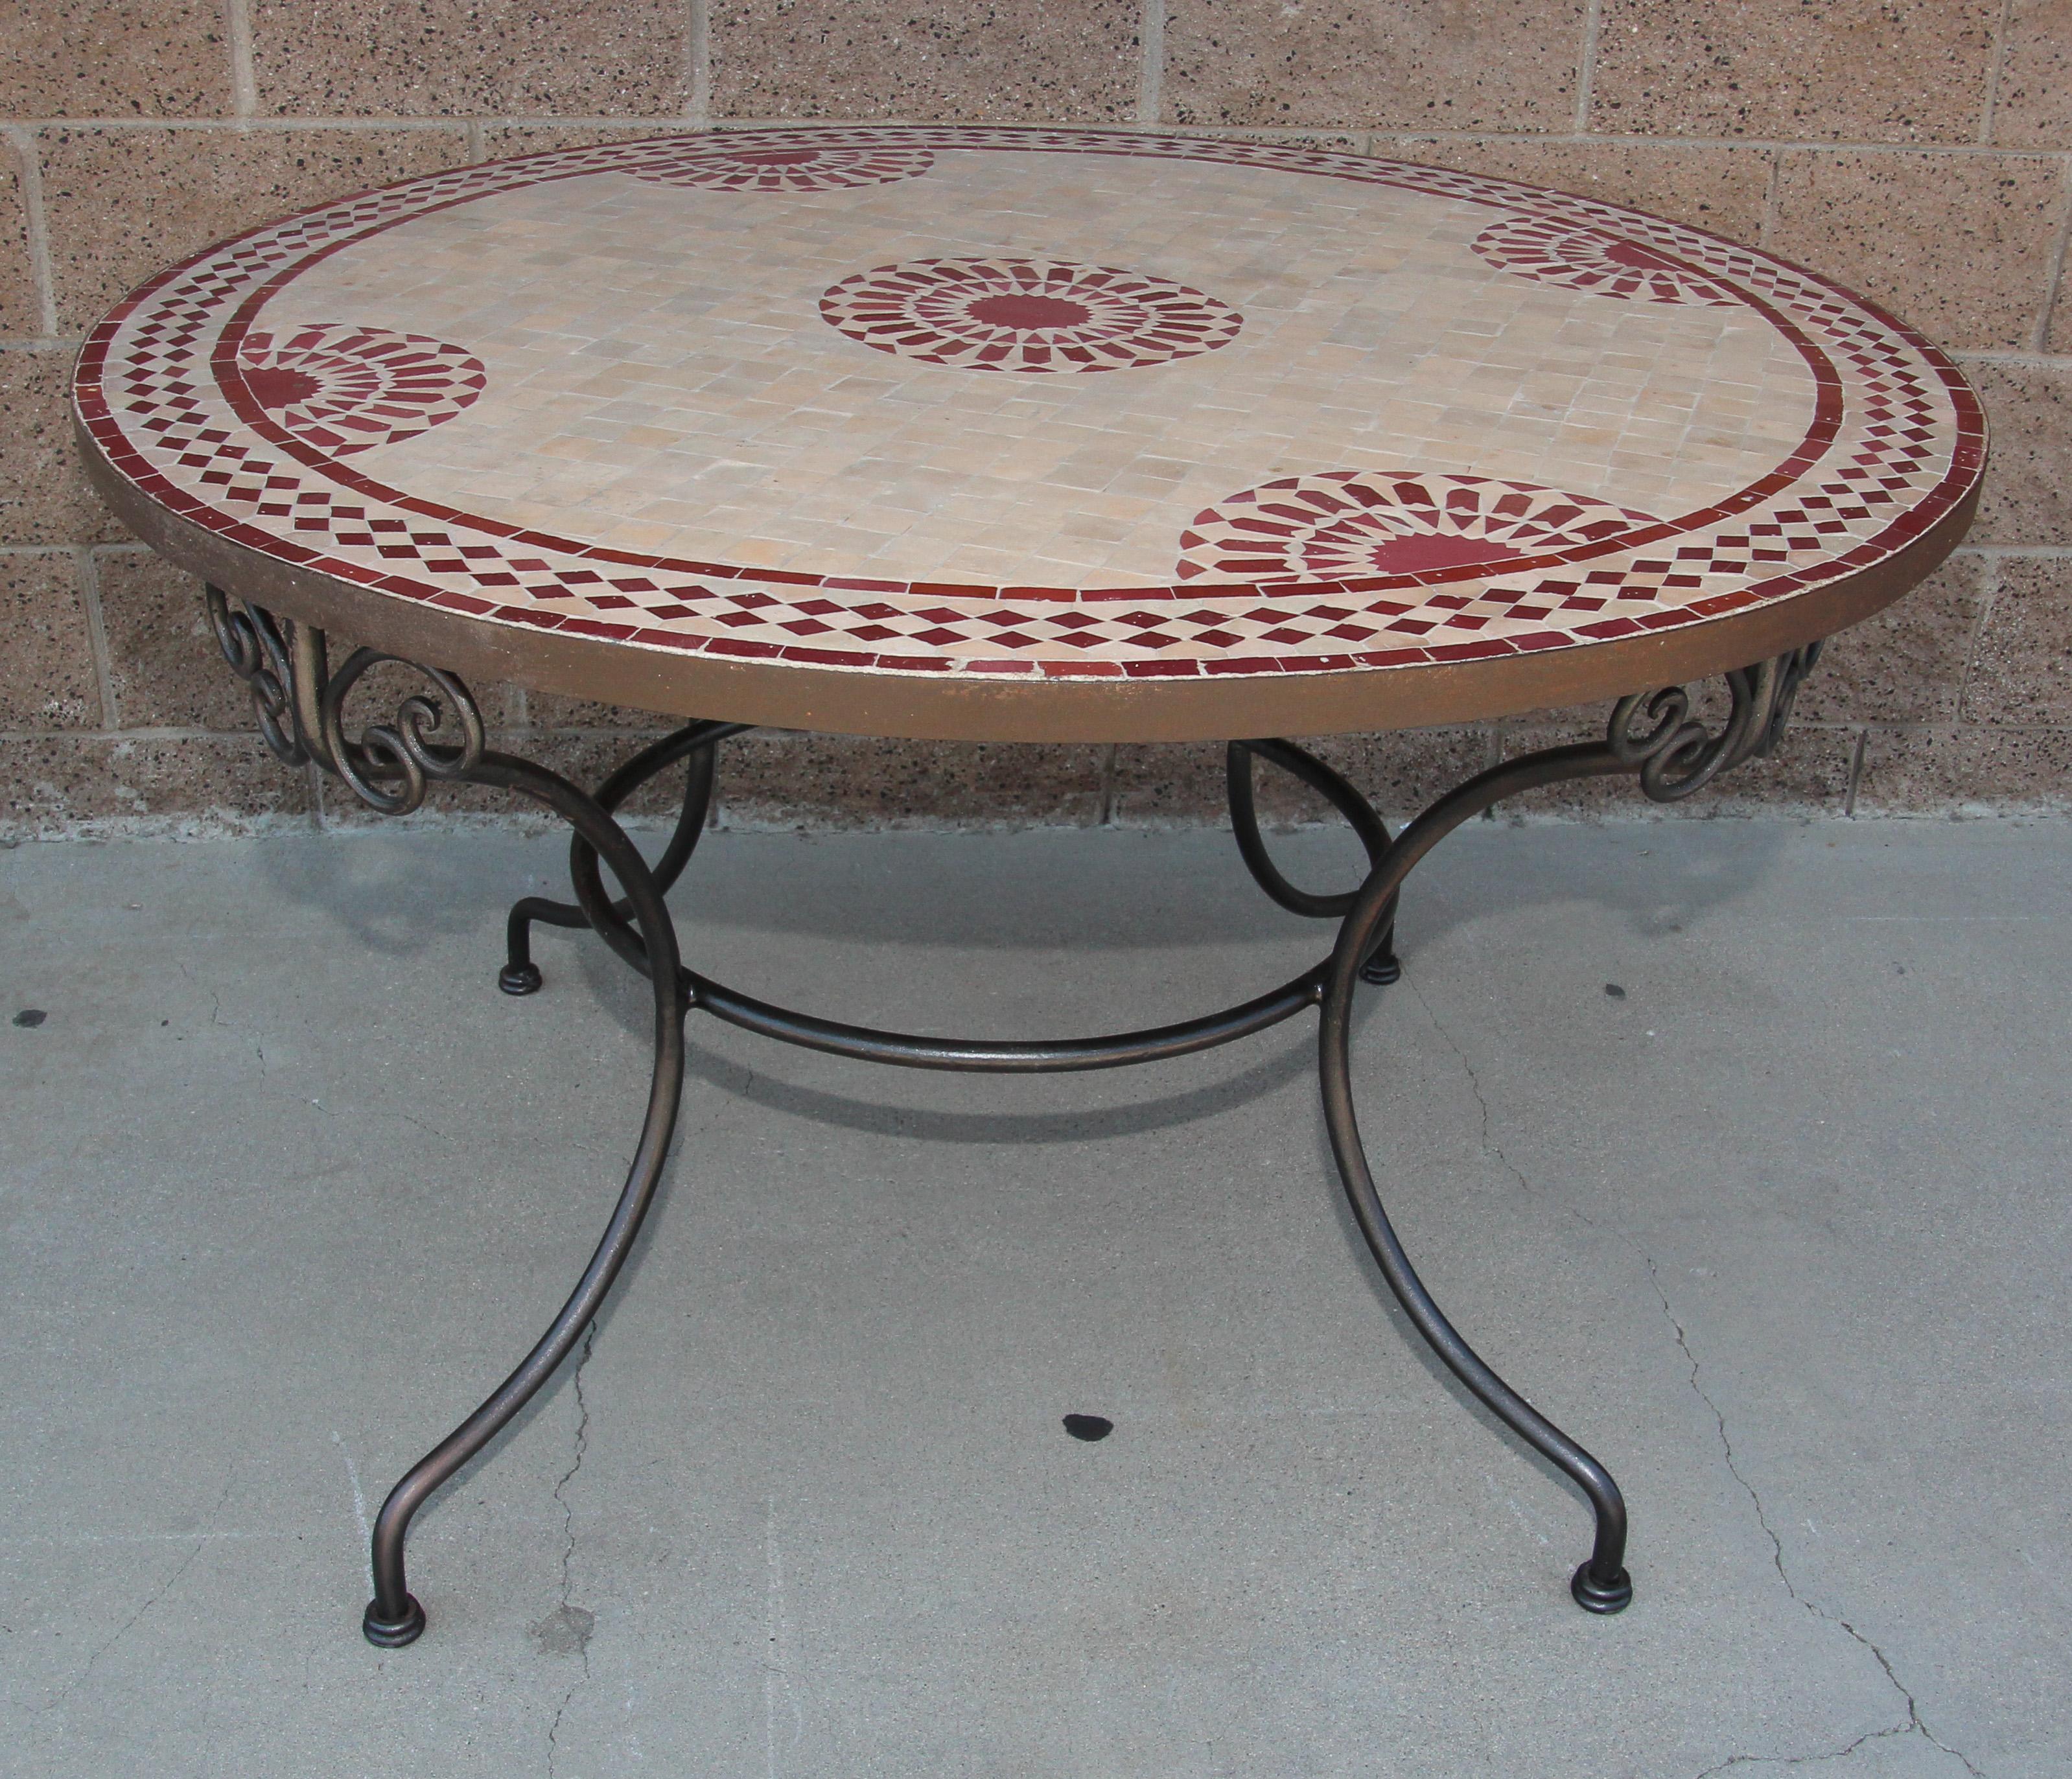 Handcrafted round Moroccan outdoor mosaic tile table 47 in. diameter on iron base.
Vintage Classic and elegant Moroccan outdoor mosaic tile table sit on a black wrought iron base.
Handmade in Morocco, the artisans from Fez used the Classic